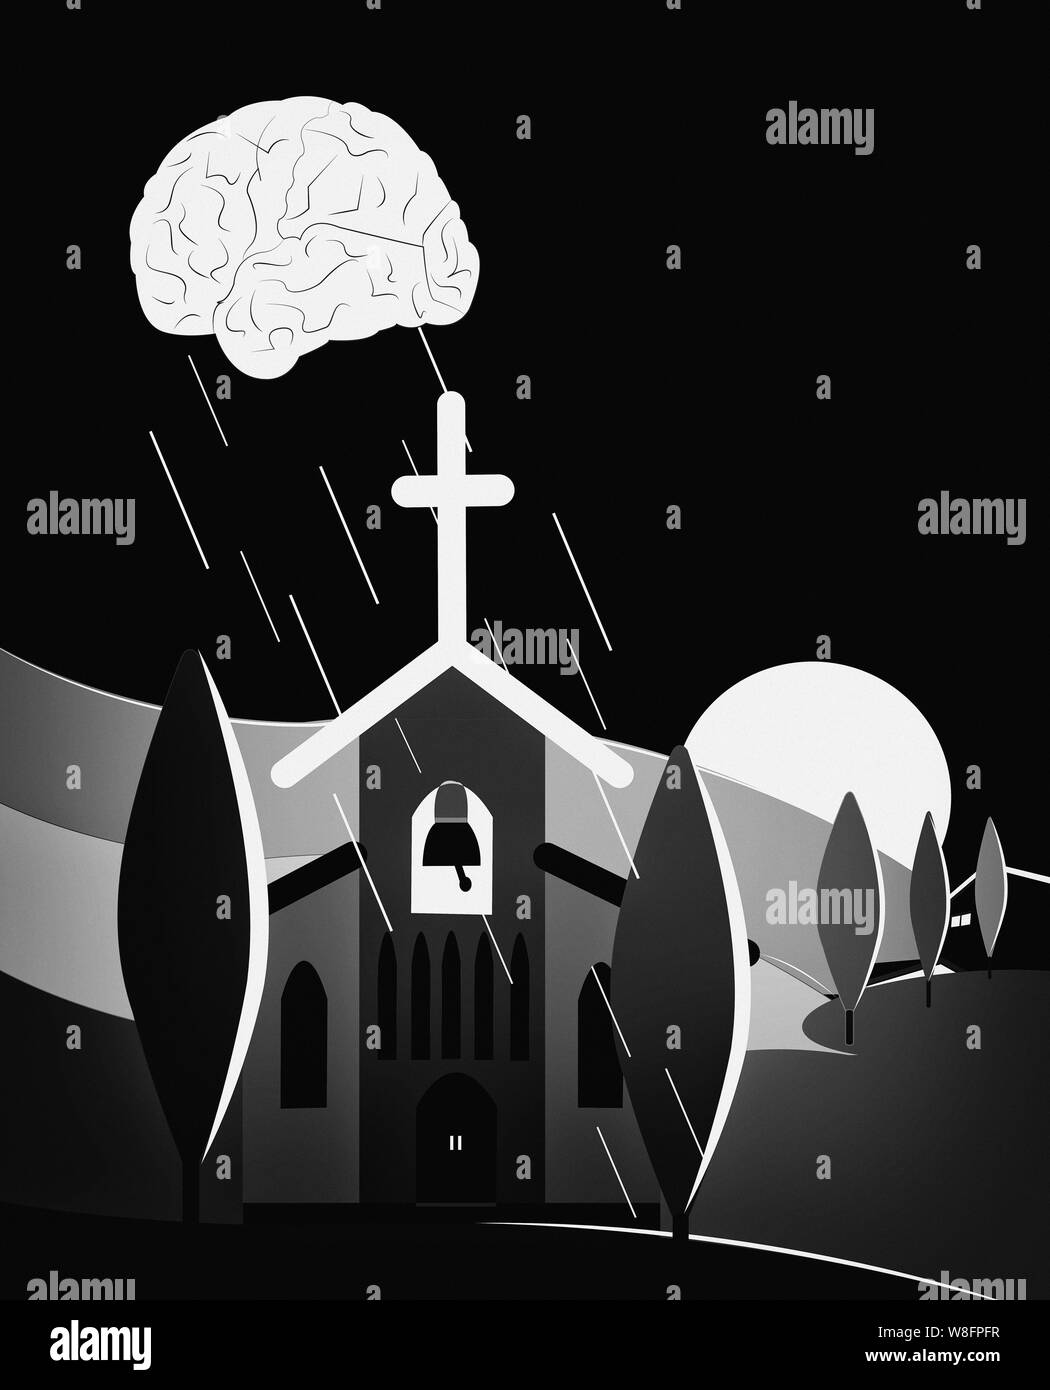 illustration of a cloud in form of a brain raining over the church in a Tuscany landscape, challenging the notion of religion Stock Photo